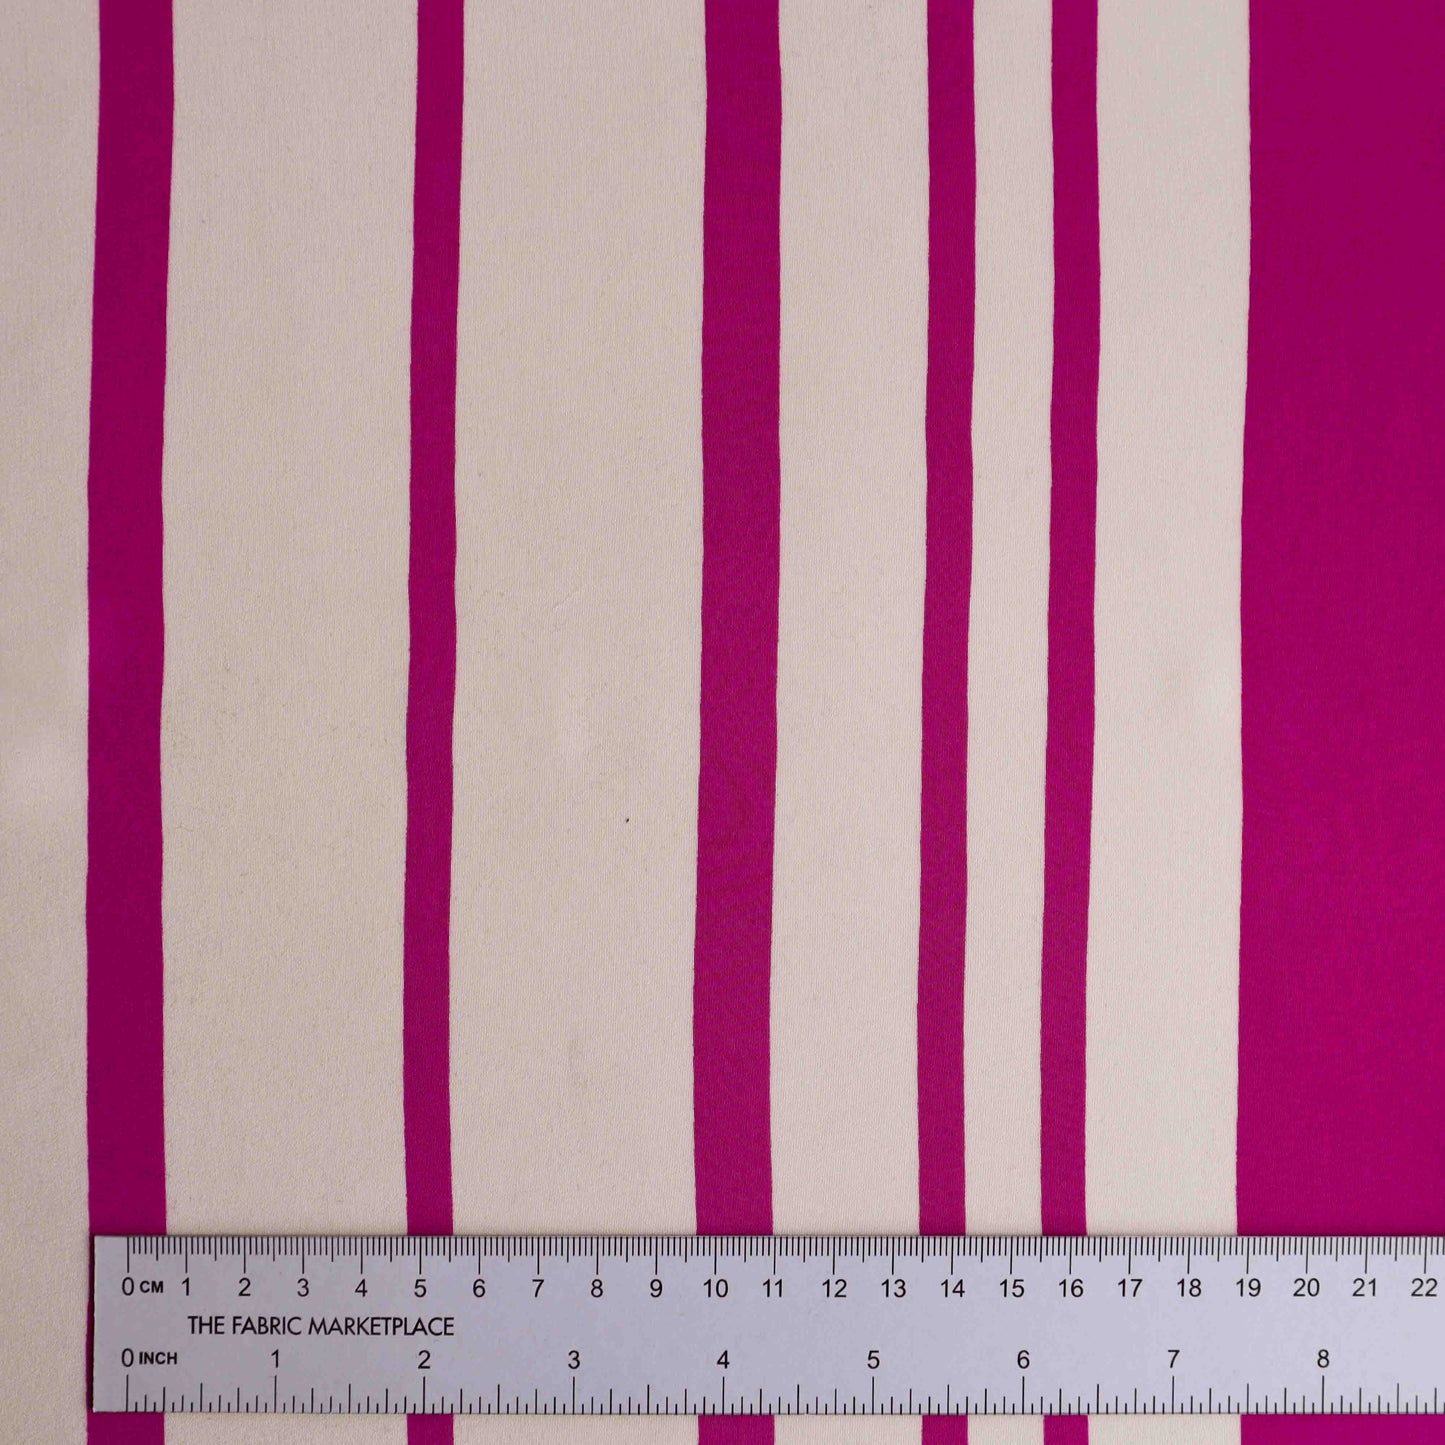 An European-made lightweight crepe-de-chine in white with magenta stripe patterns. This fabric has a dry, smooth hand feel yet softens considerably after washing.